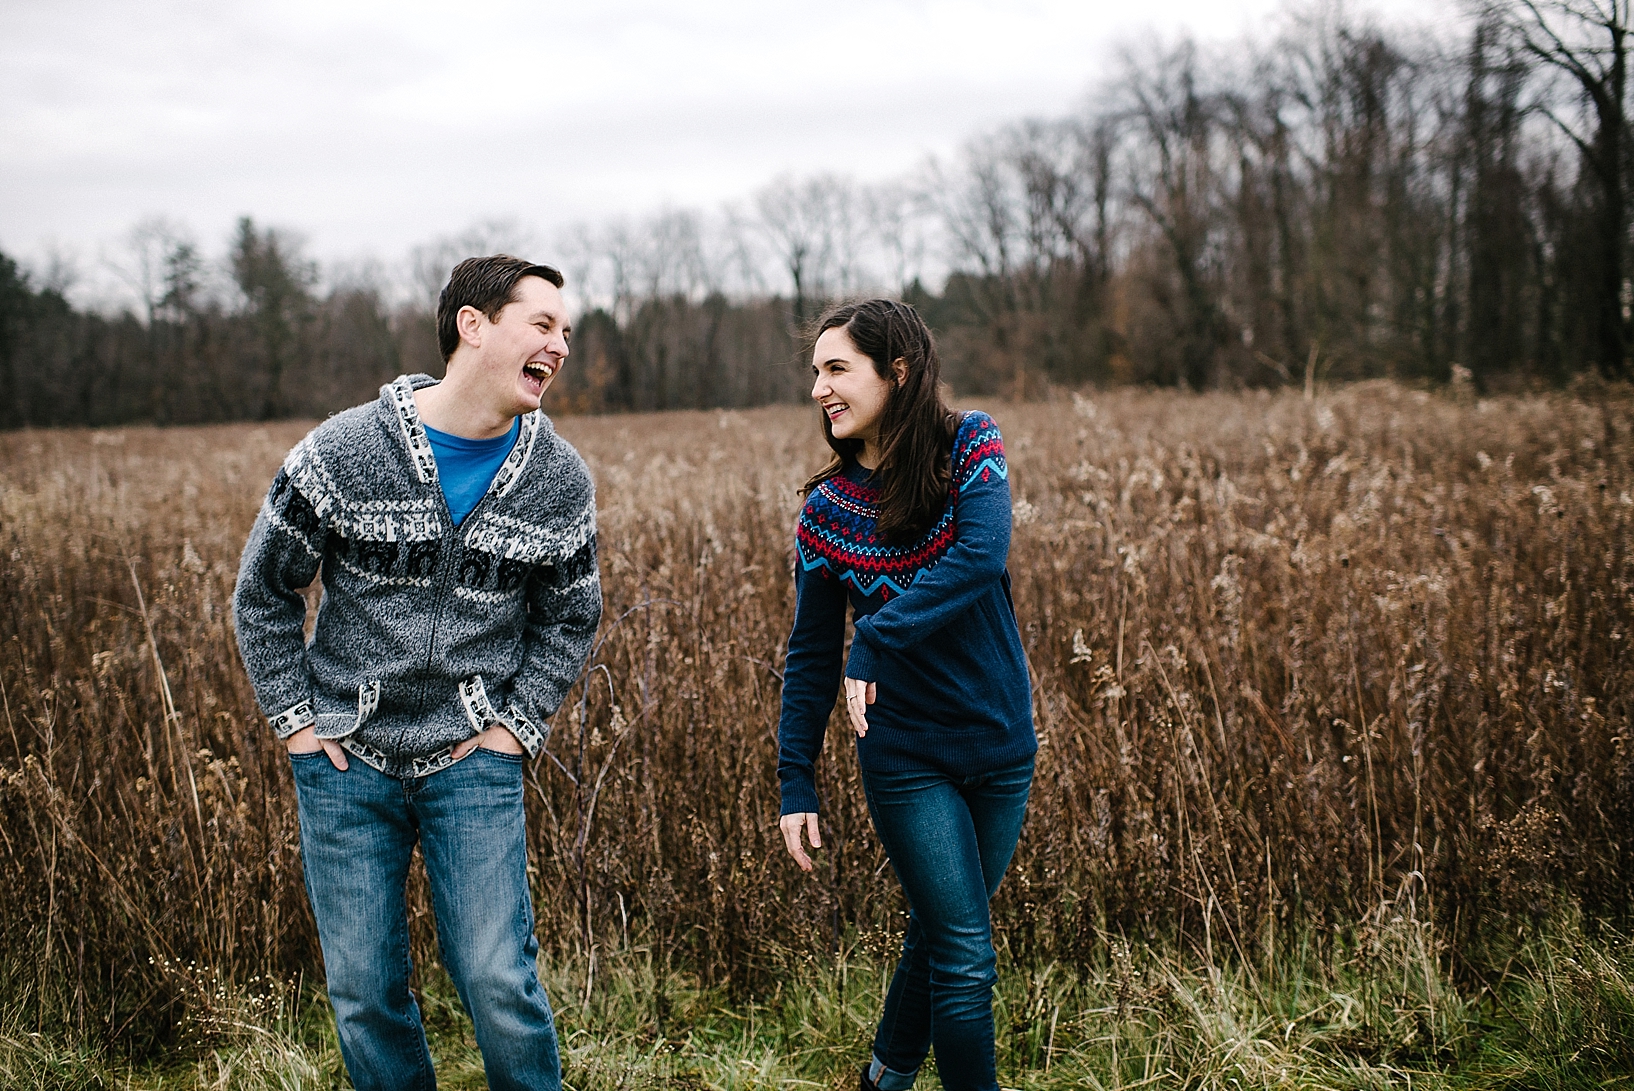 guy in grey sweater and girl in blue sweater laughing and playing in winter field